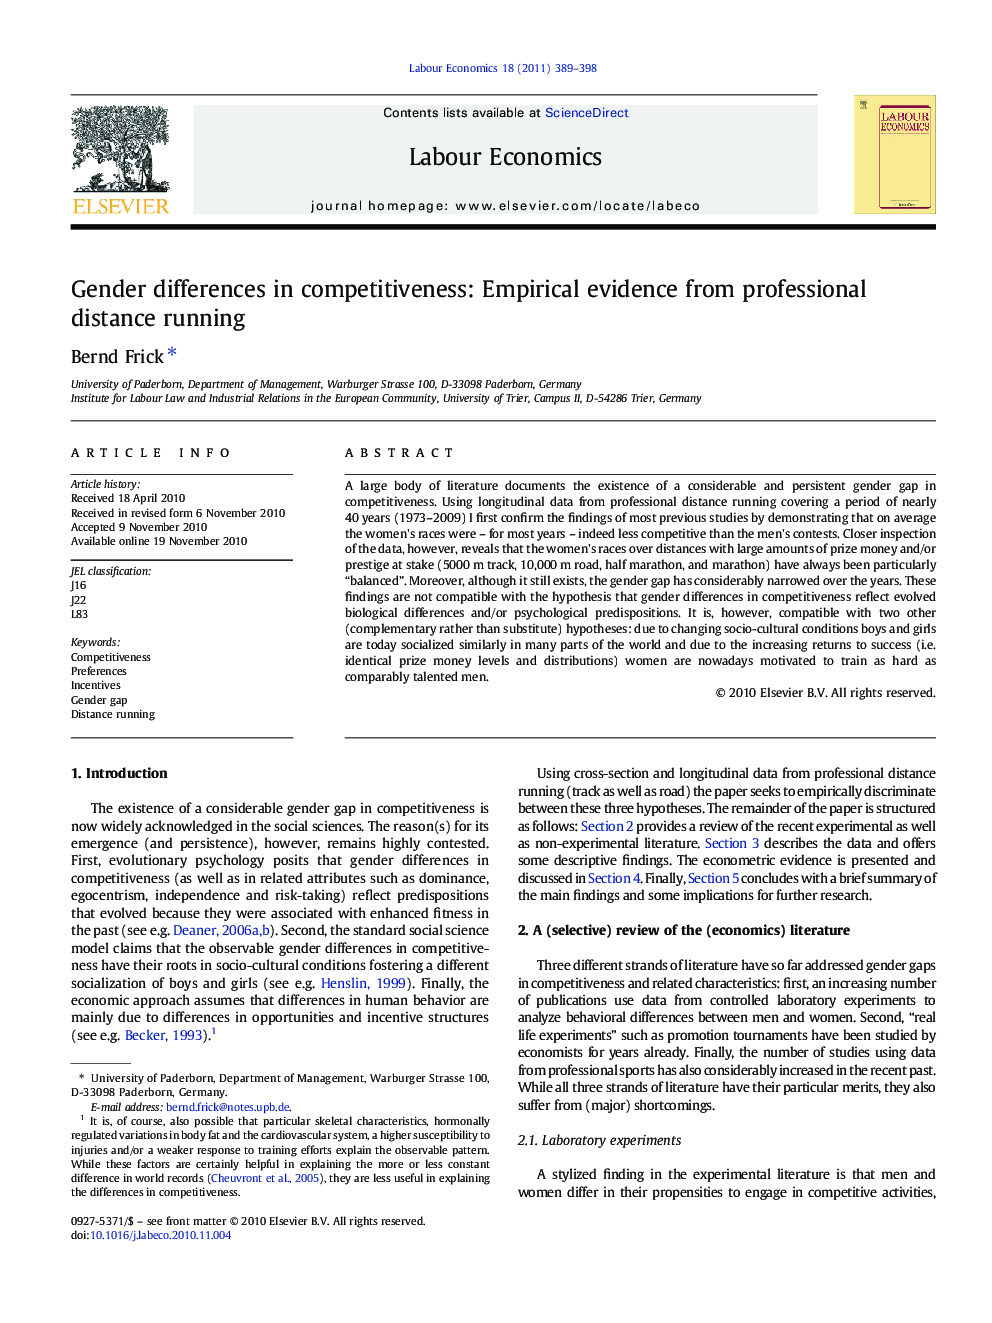 Gender differences in competitiveness: Empirical evidence from professional distance running